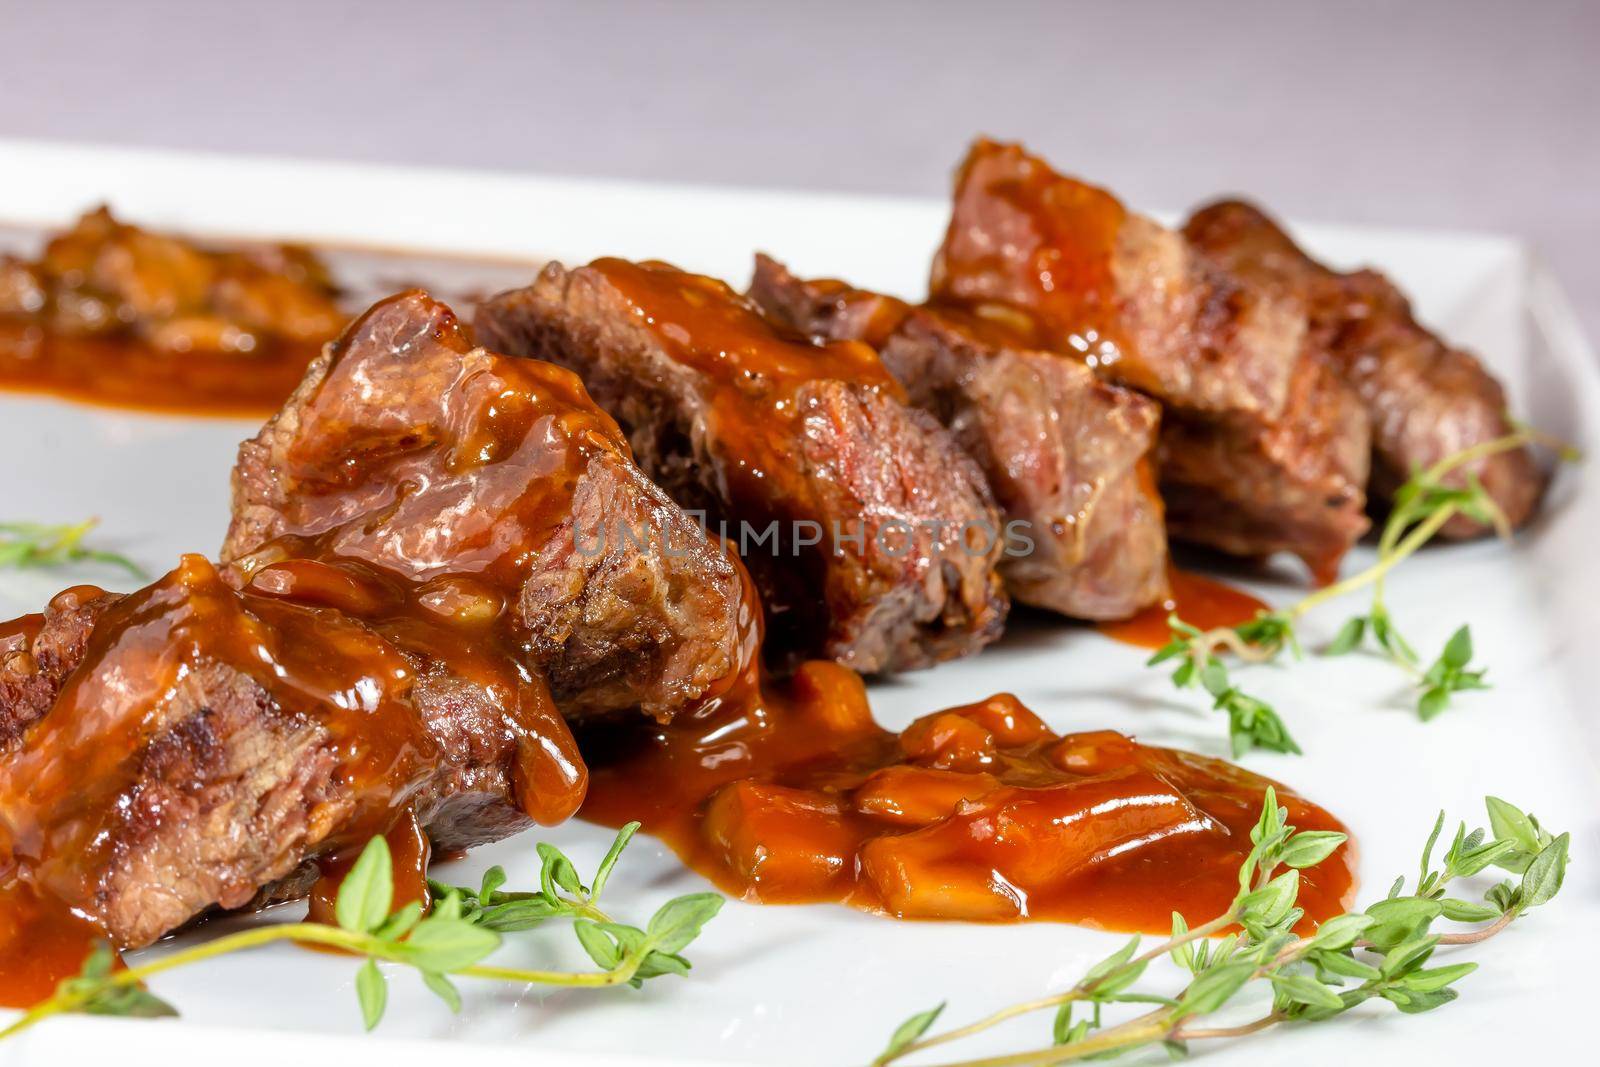 Beef kebab with tomato sauce with vegetables is on a plate by Milanchikov